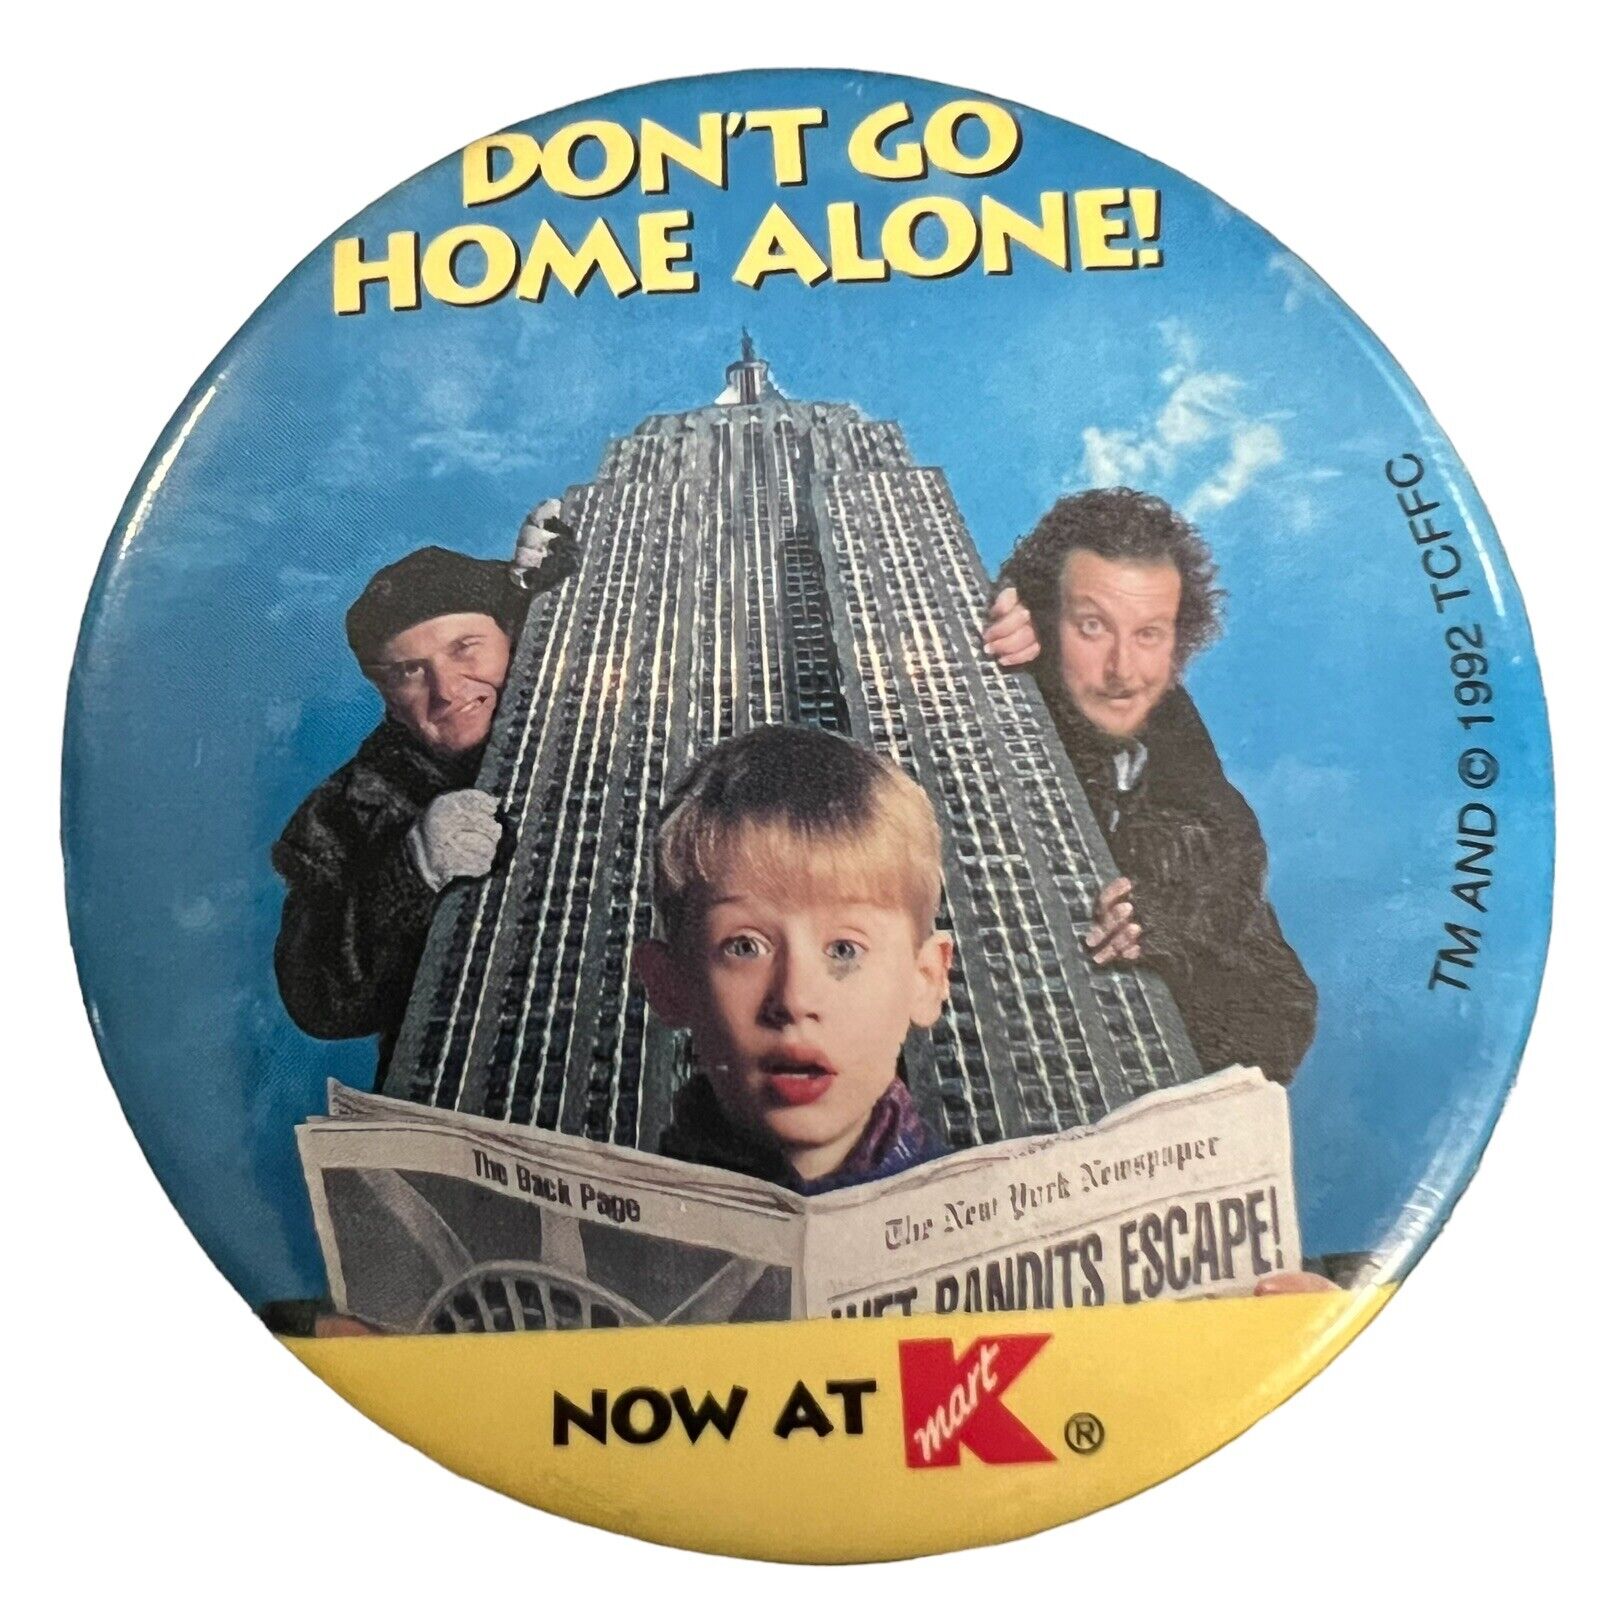 Vintage 1992 Home Alone 2   Dont Go Home Alone   Pinback Button  Now At KMart